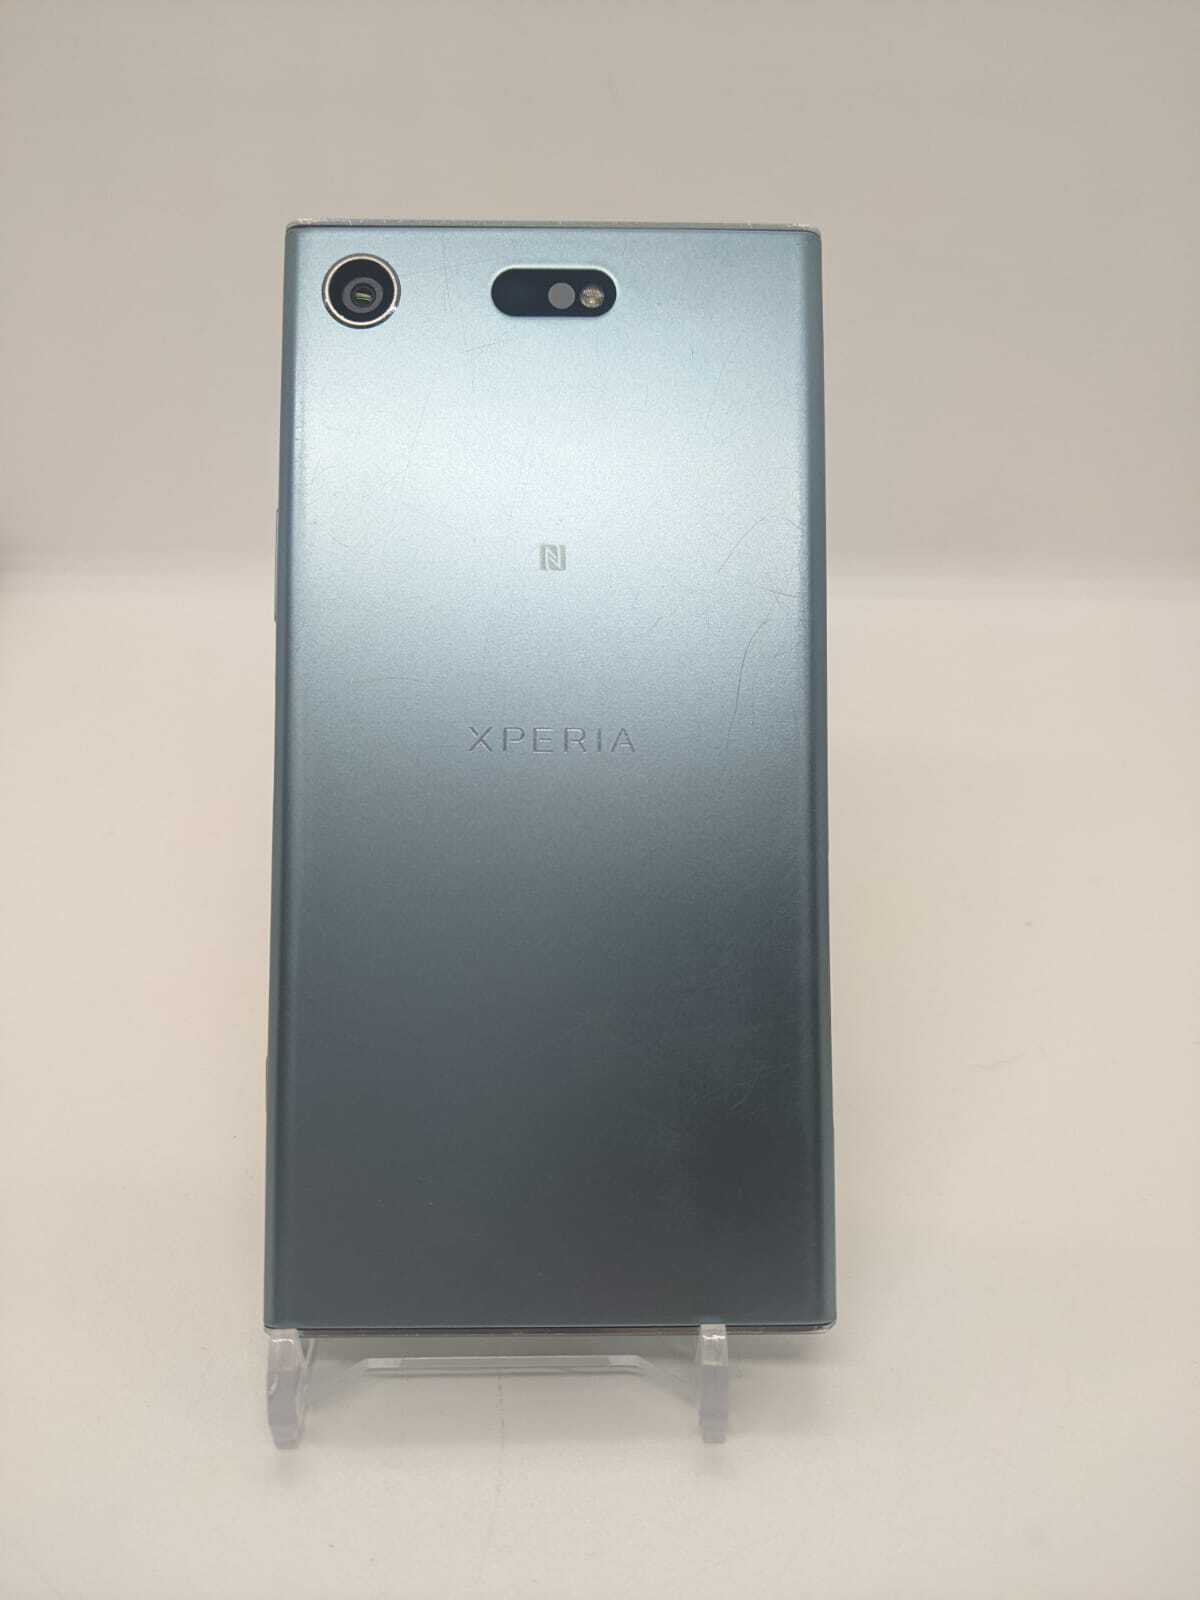 Sony Xperia XZ1 Compact 32GB Unlocked Android 4G LTE Blue Smartphone G8441